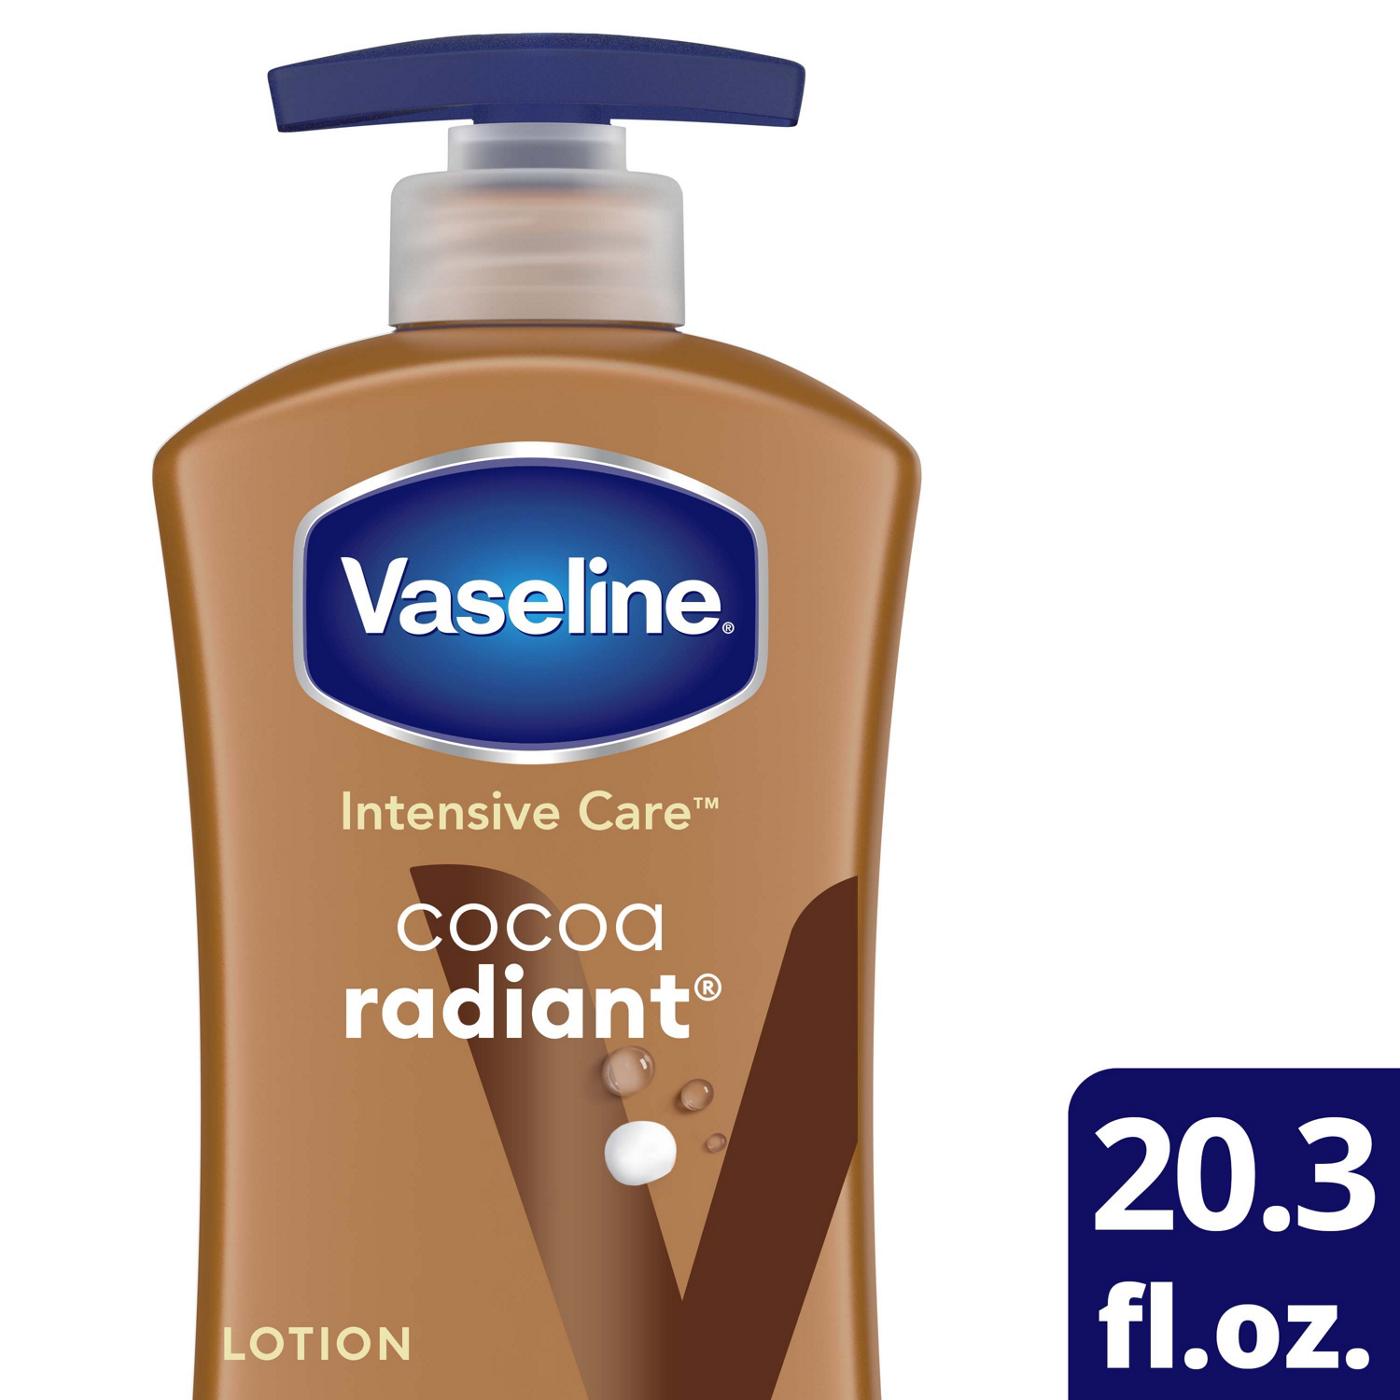 Vaseline Intensive Care Cocoa Radiant Lotion; image 6 of 10